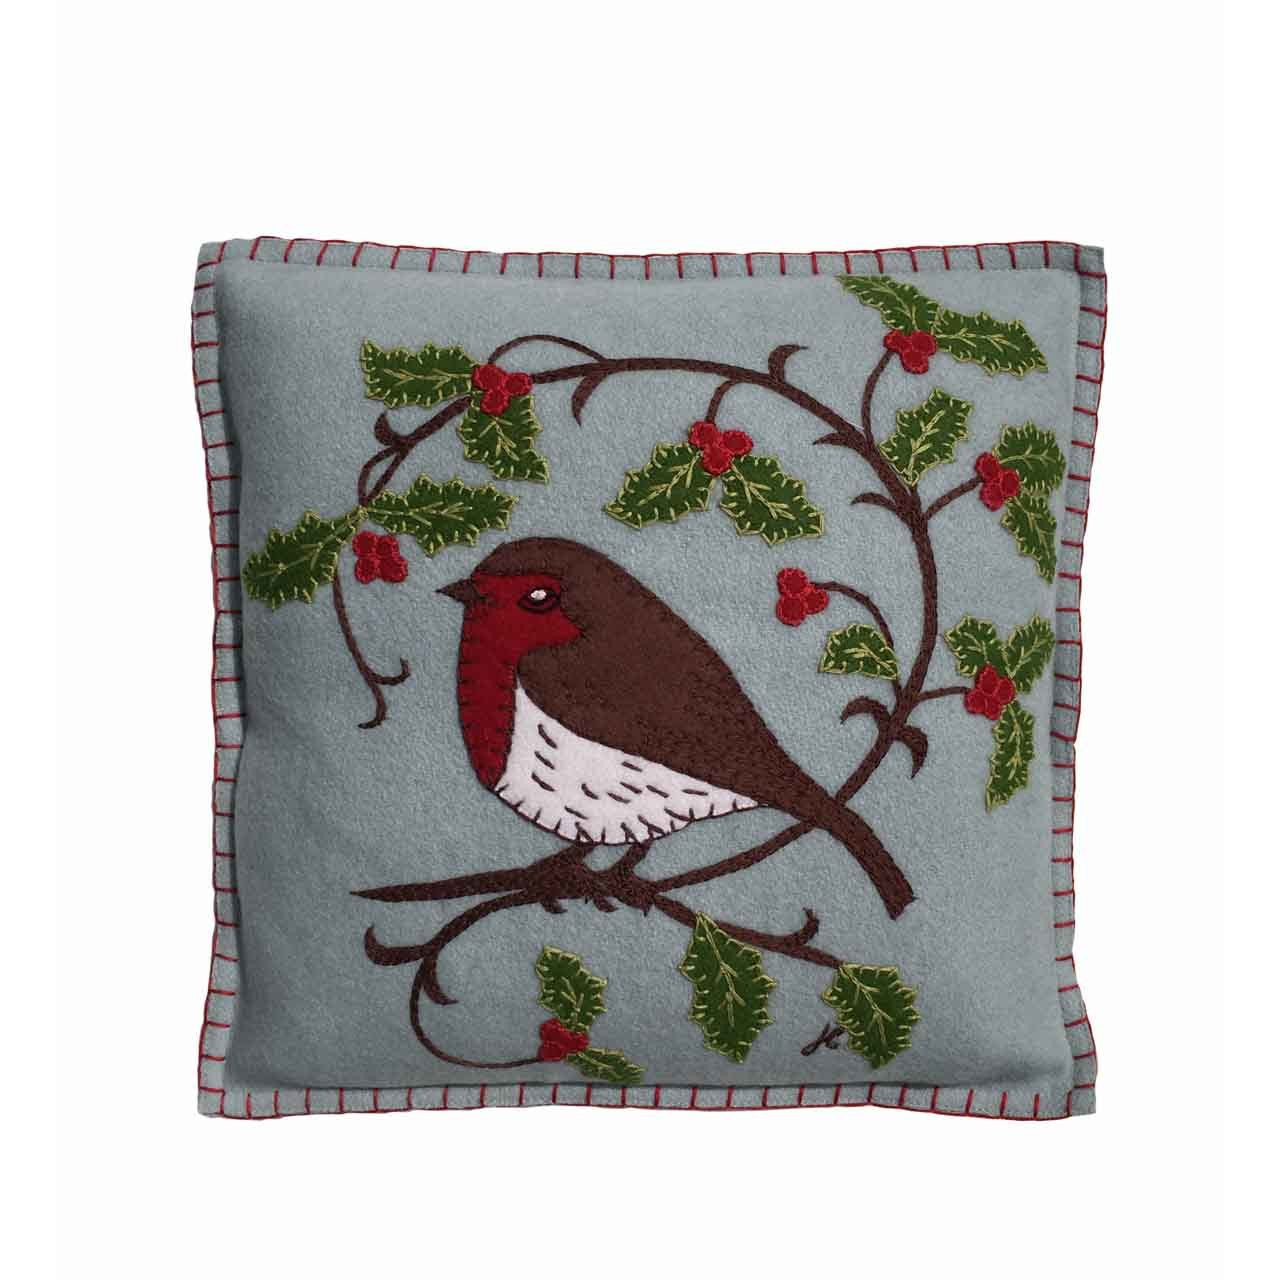 Holly Robin cushion in duck egg blue. Hand embroided from Jan Constantine, England.